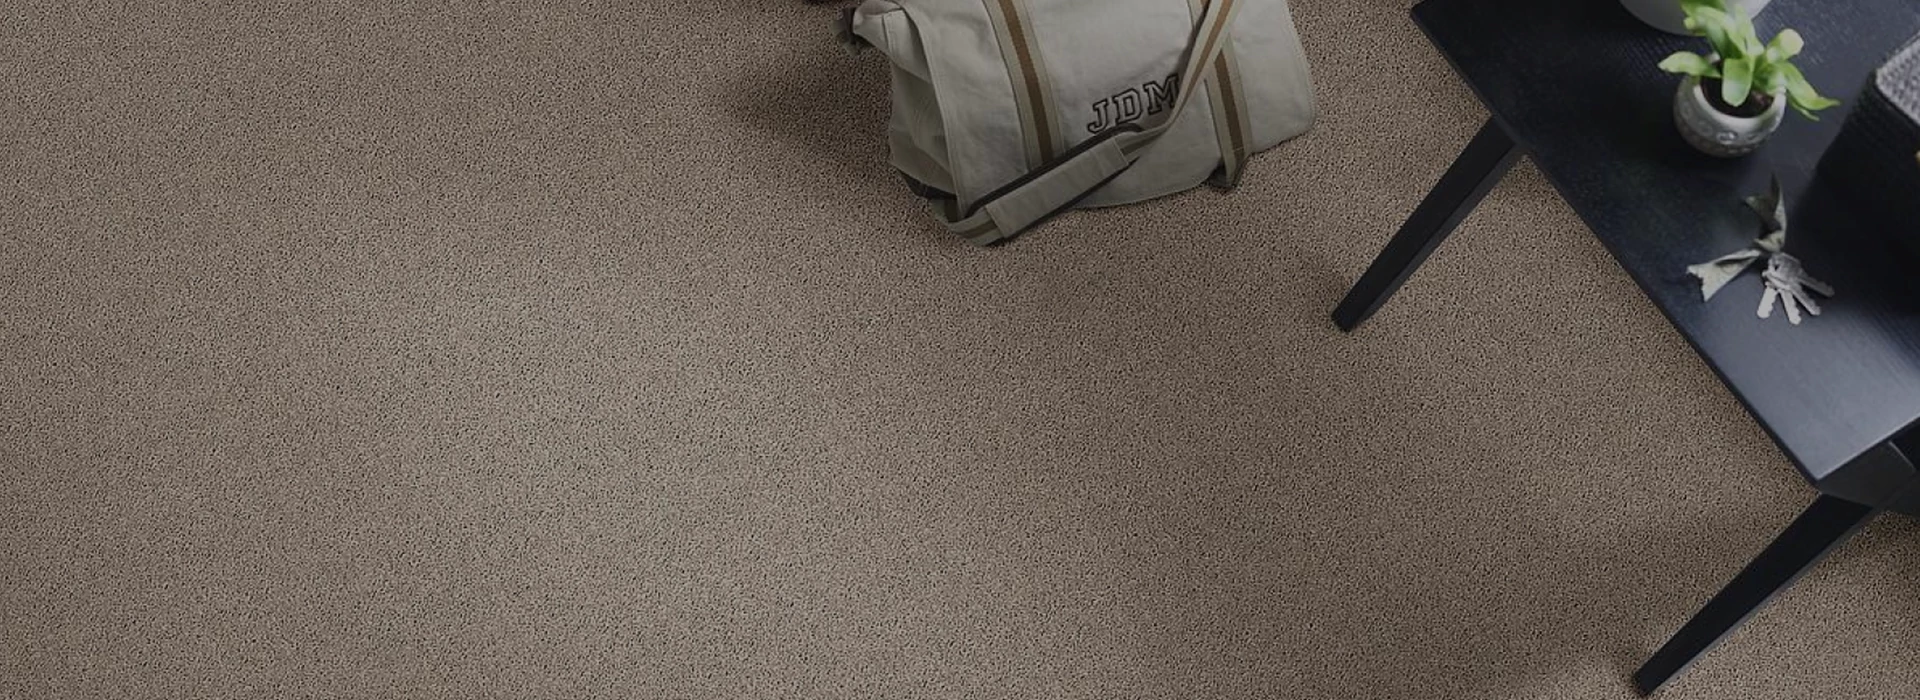 Carpet flooring with a bag and short desk on the side.